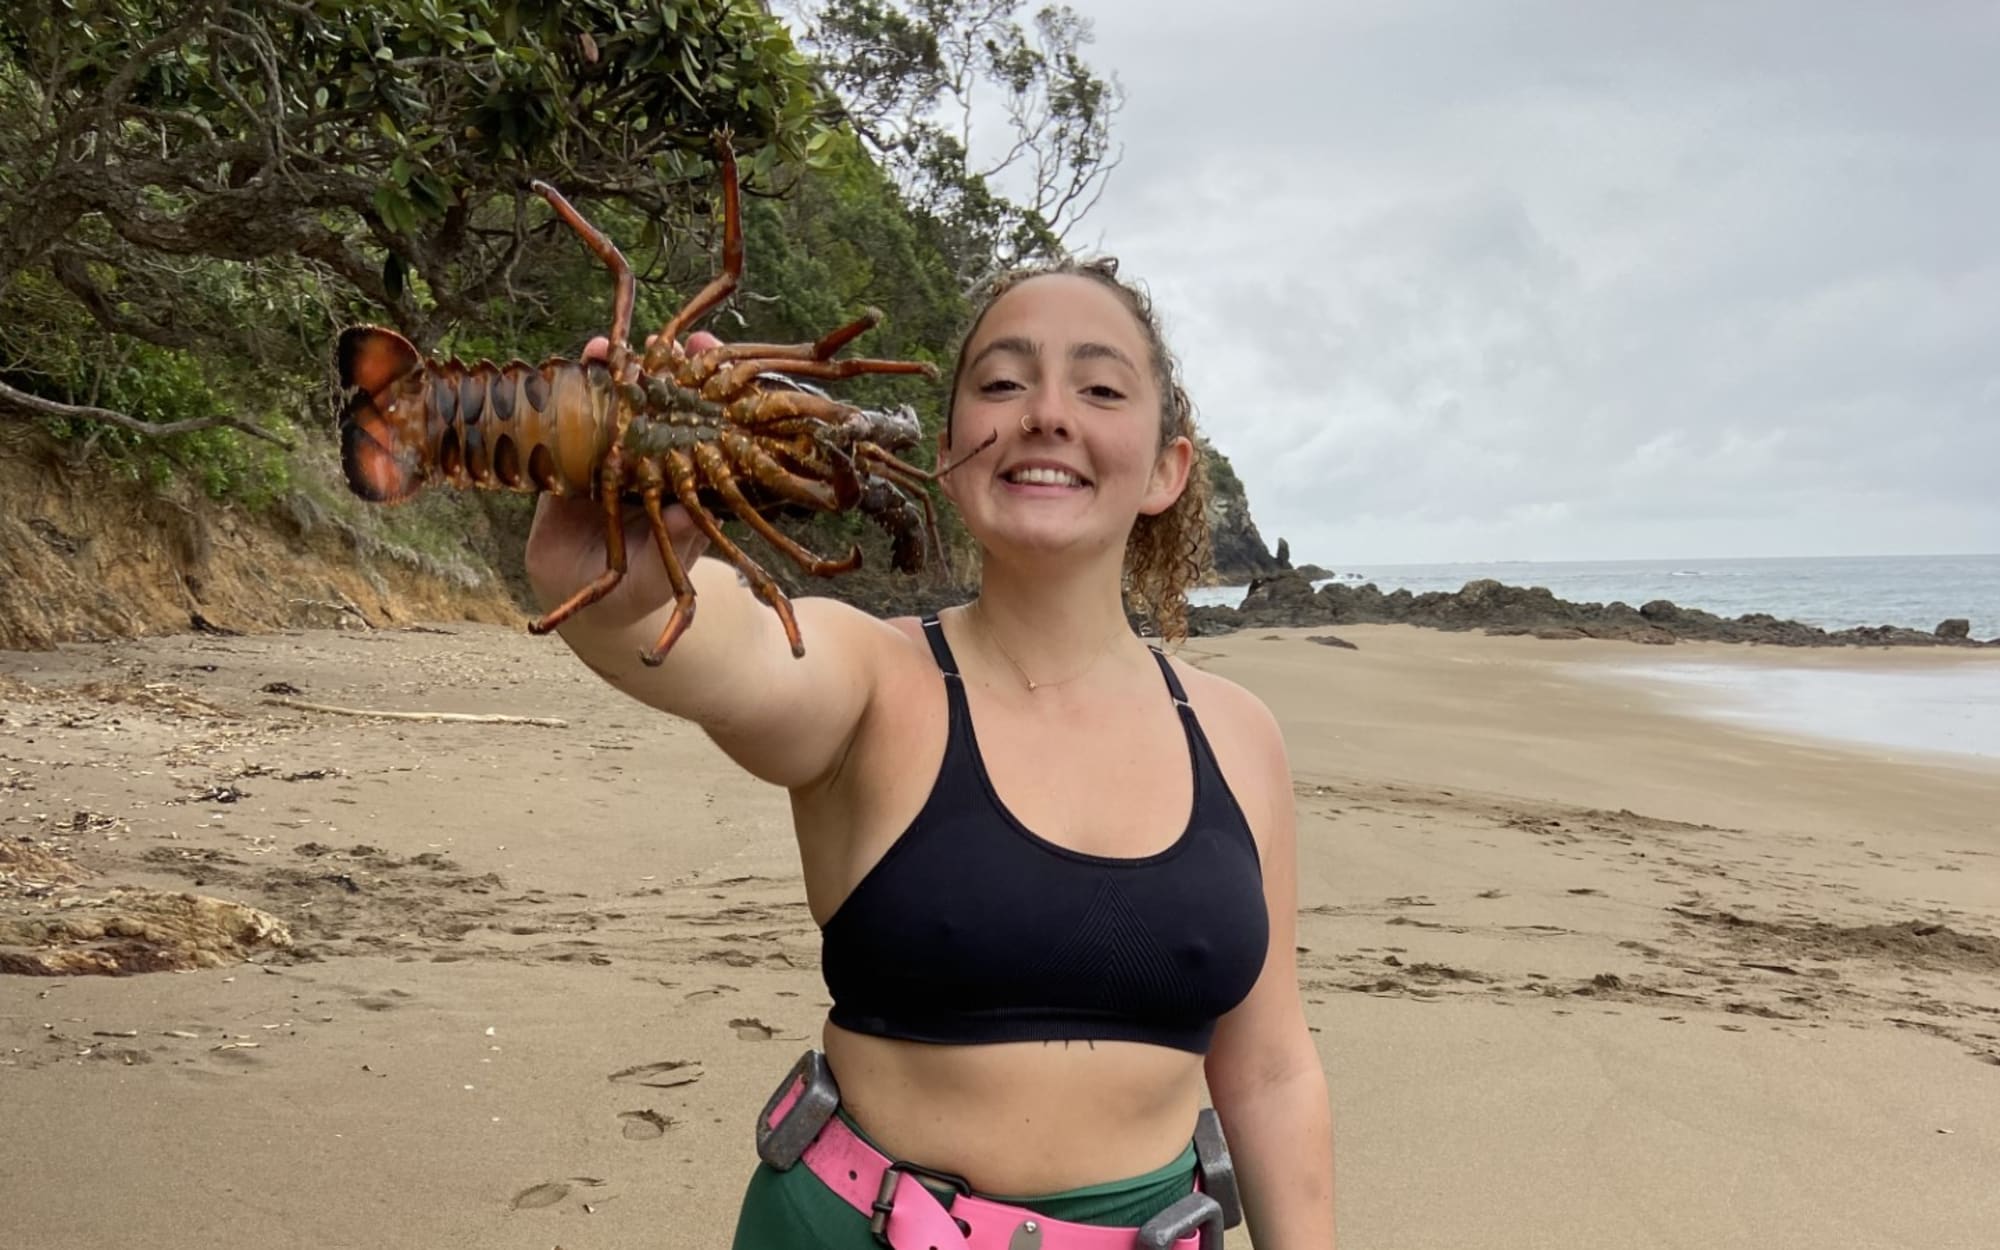 Ellie Franco and her first free-dive-caught crayfish at Daisy Bay, Matapouri.